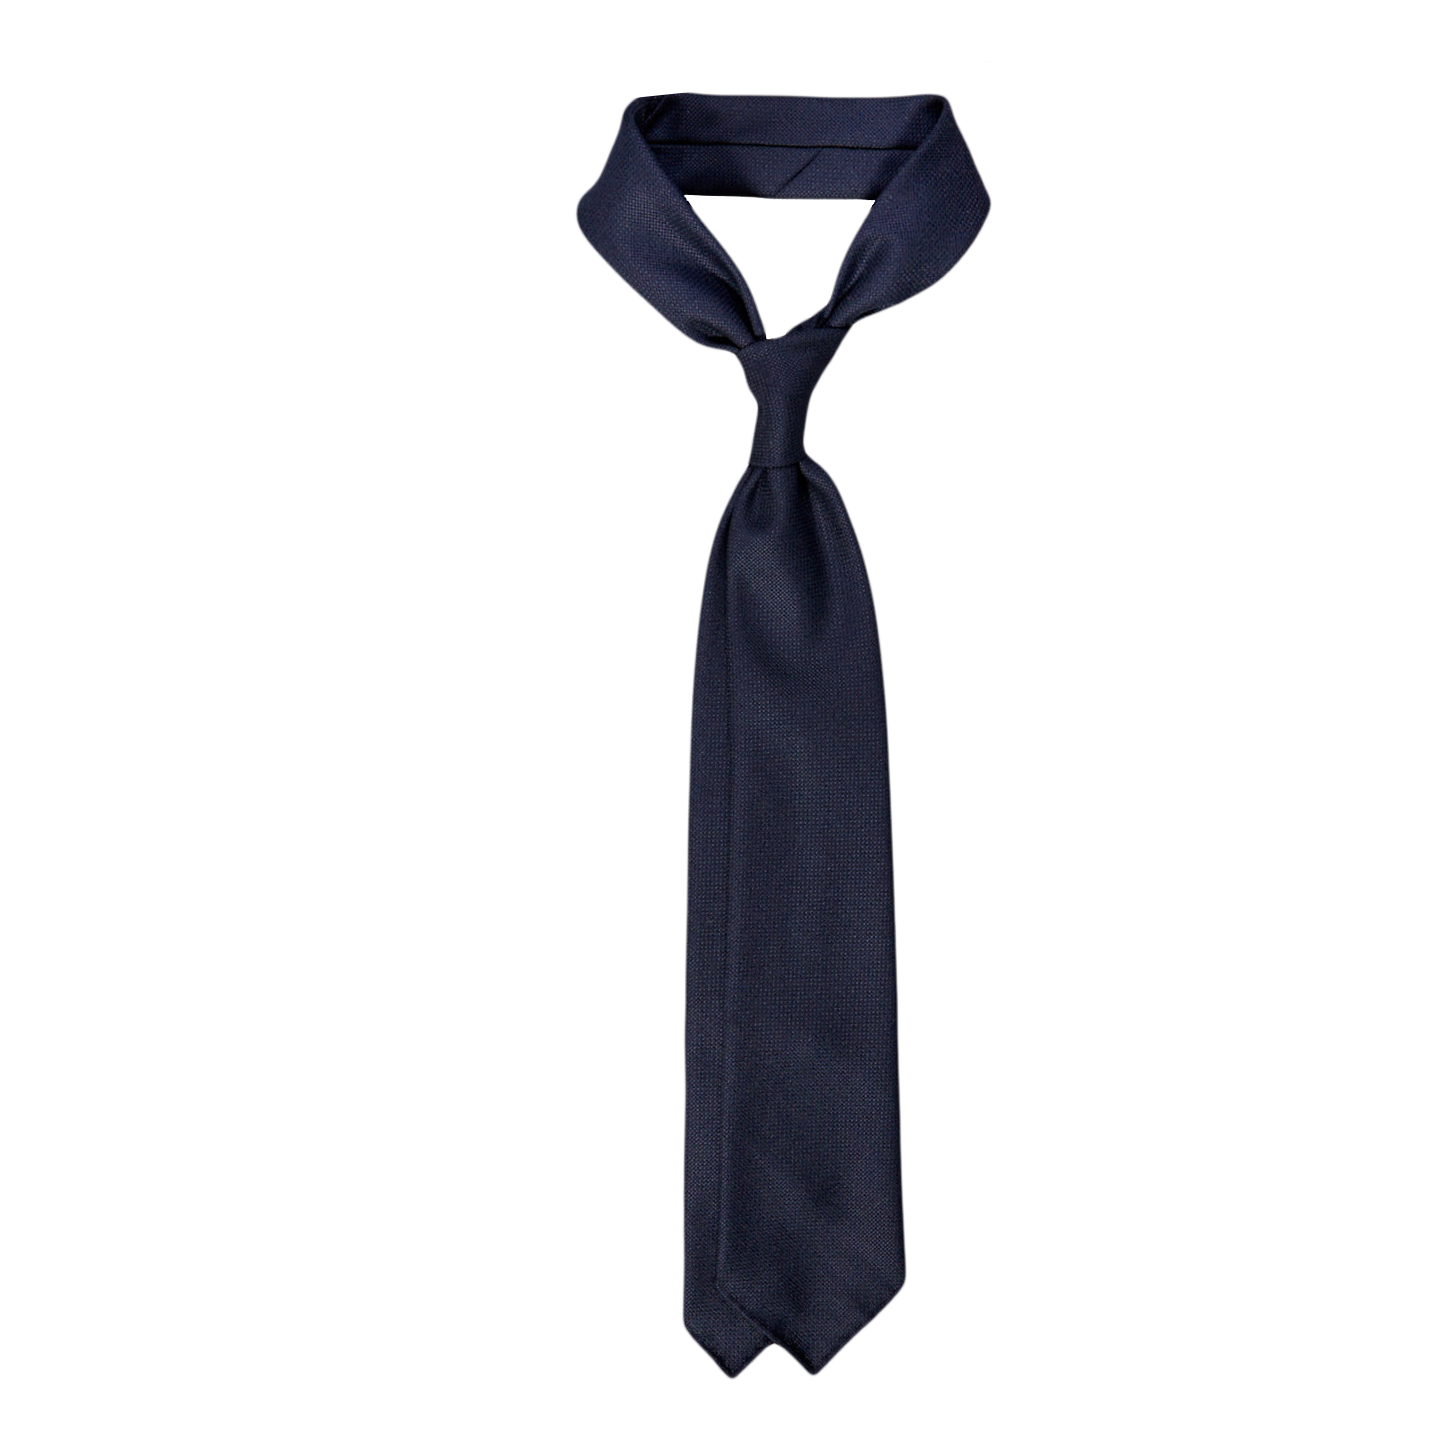 A Dreaming Of Monday Navy Blue 7-Fold Wool Hopsack Tie from Italy.